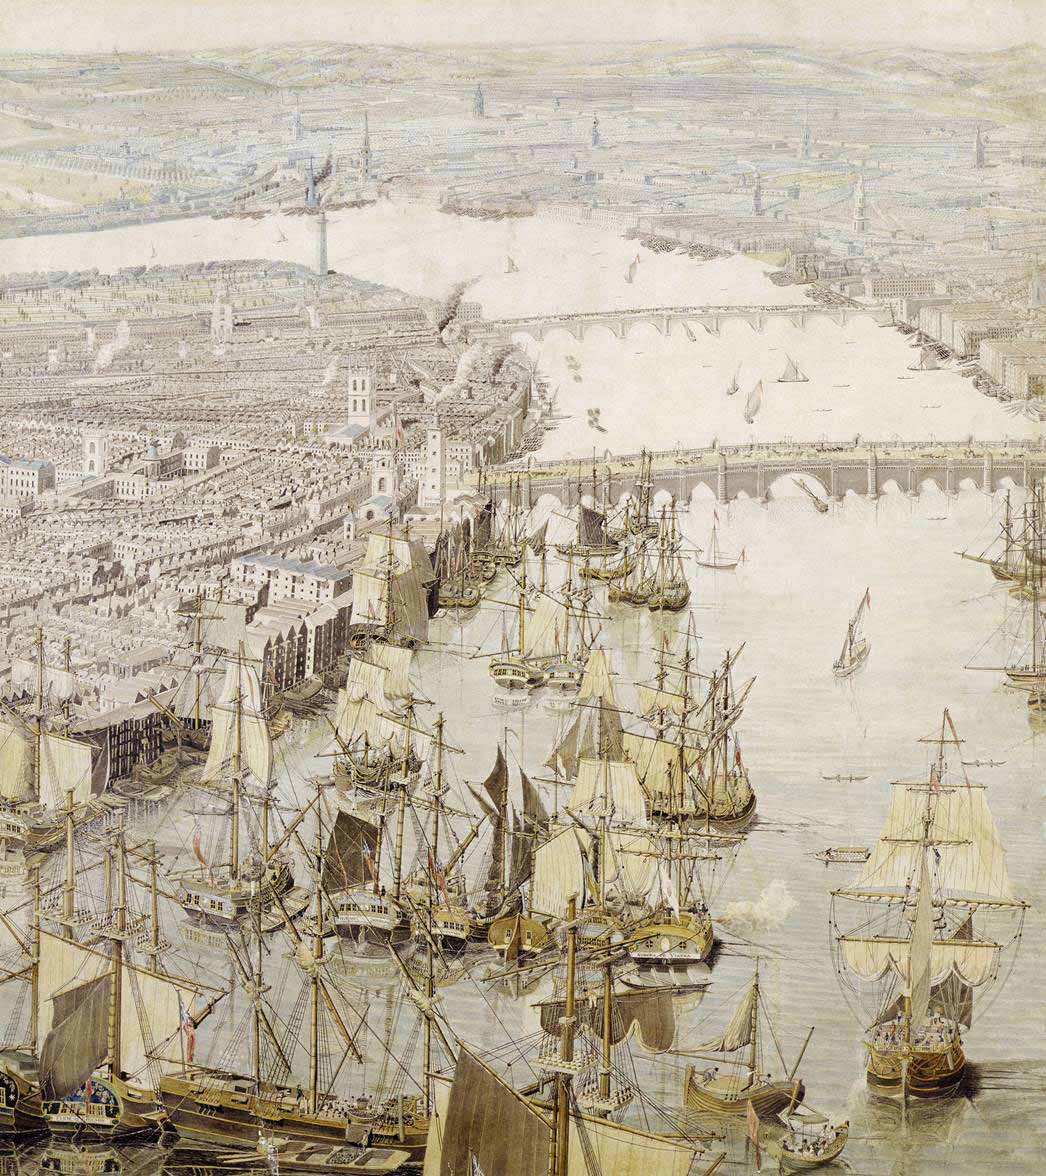 A closer look at the Rhinebeck Panorama showing London Bridge and shipping and Bermondsey wharves. (ID no.: 98.57/2)